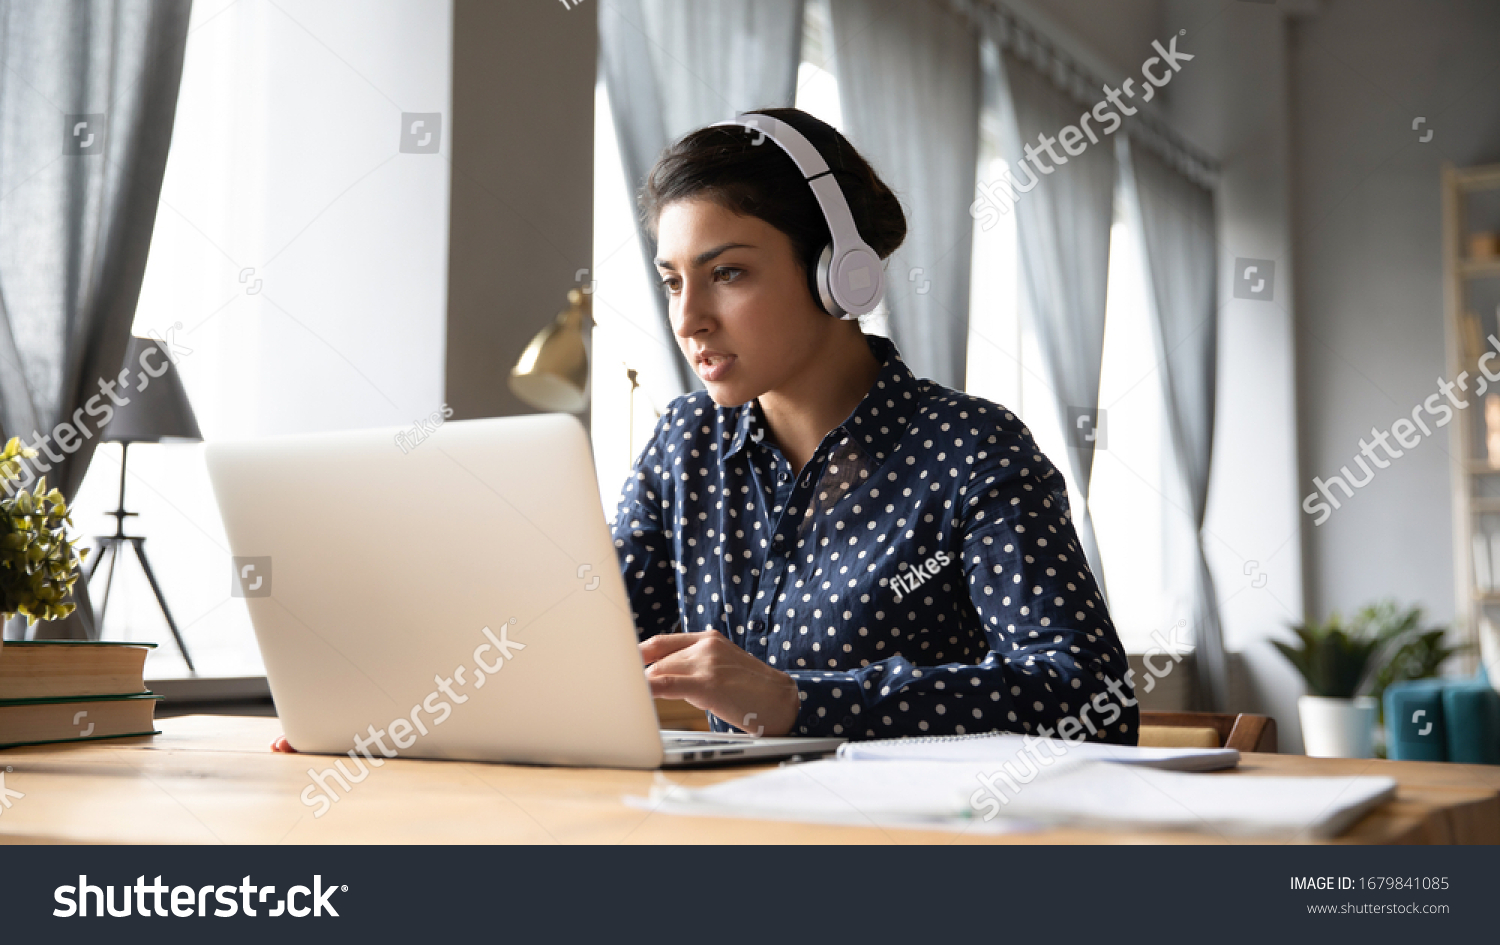 Busy young Indian woman wearing headphones working on laptop, looking at screen, making video call, engaged in conference, focused student listening to lecture, learning language online #1679841085